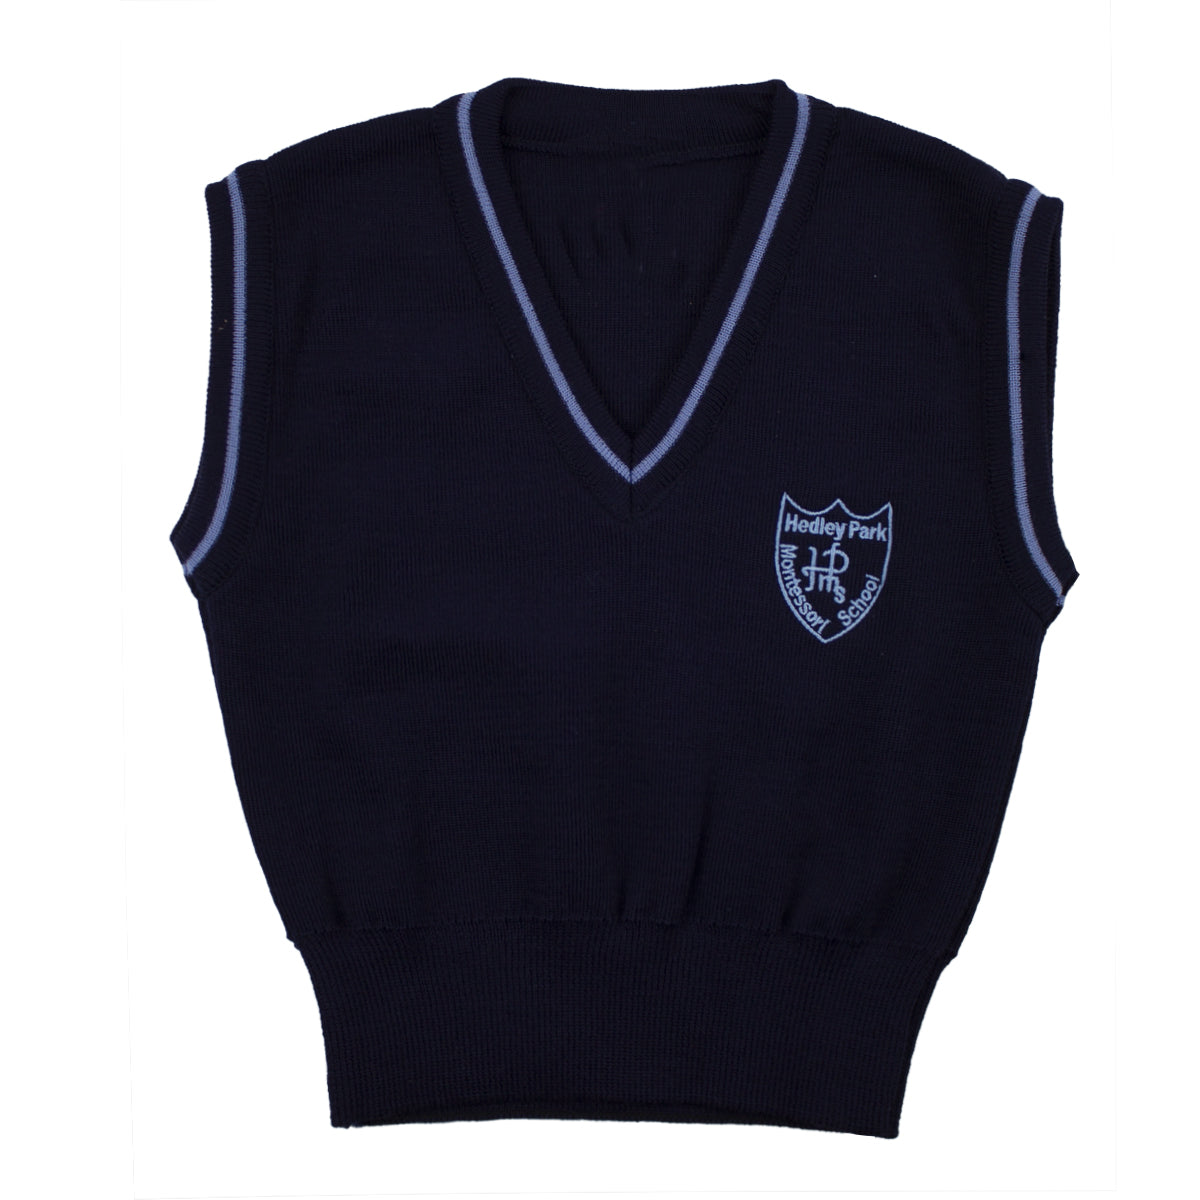 A Photo of the Hedley Park Sleevless Pullover in Navy with embroidered School Crest